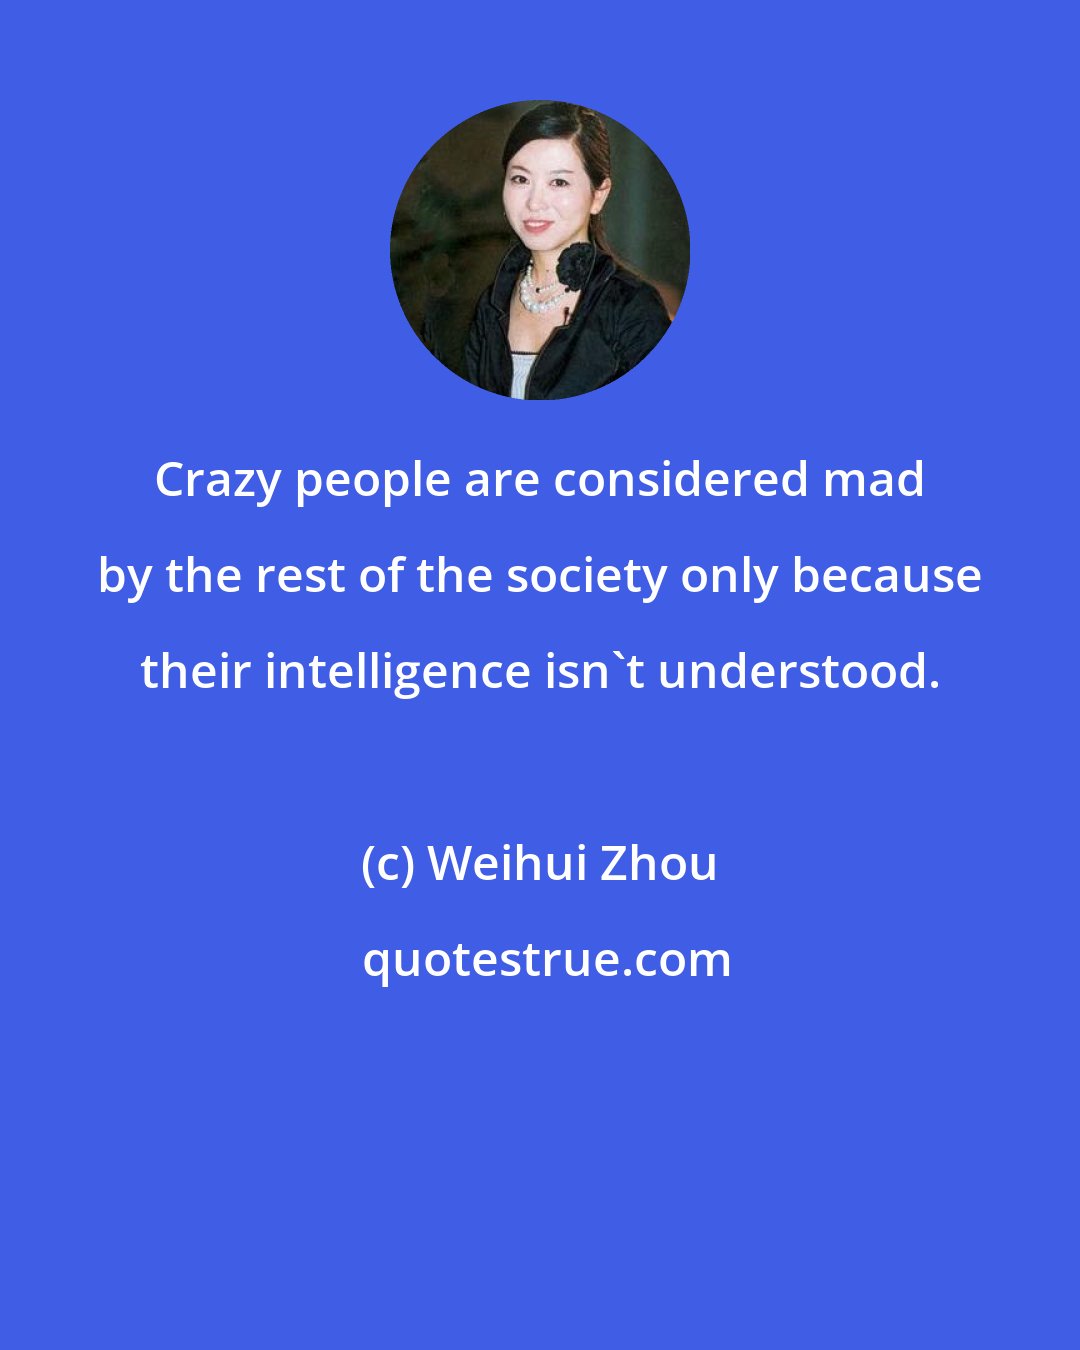 Weihui Zhou: Crazy people are considered mad by the rest of the society only because their intelligence isn't understood.